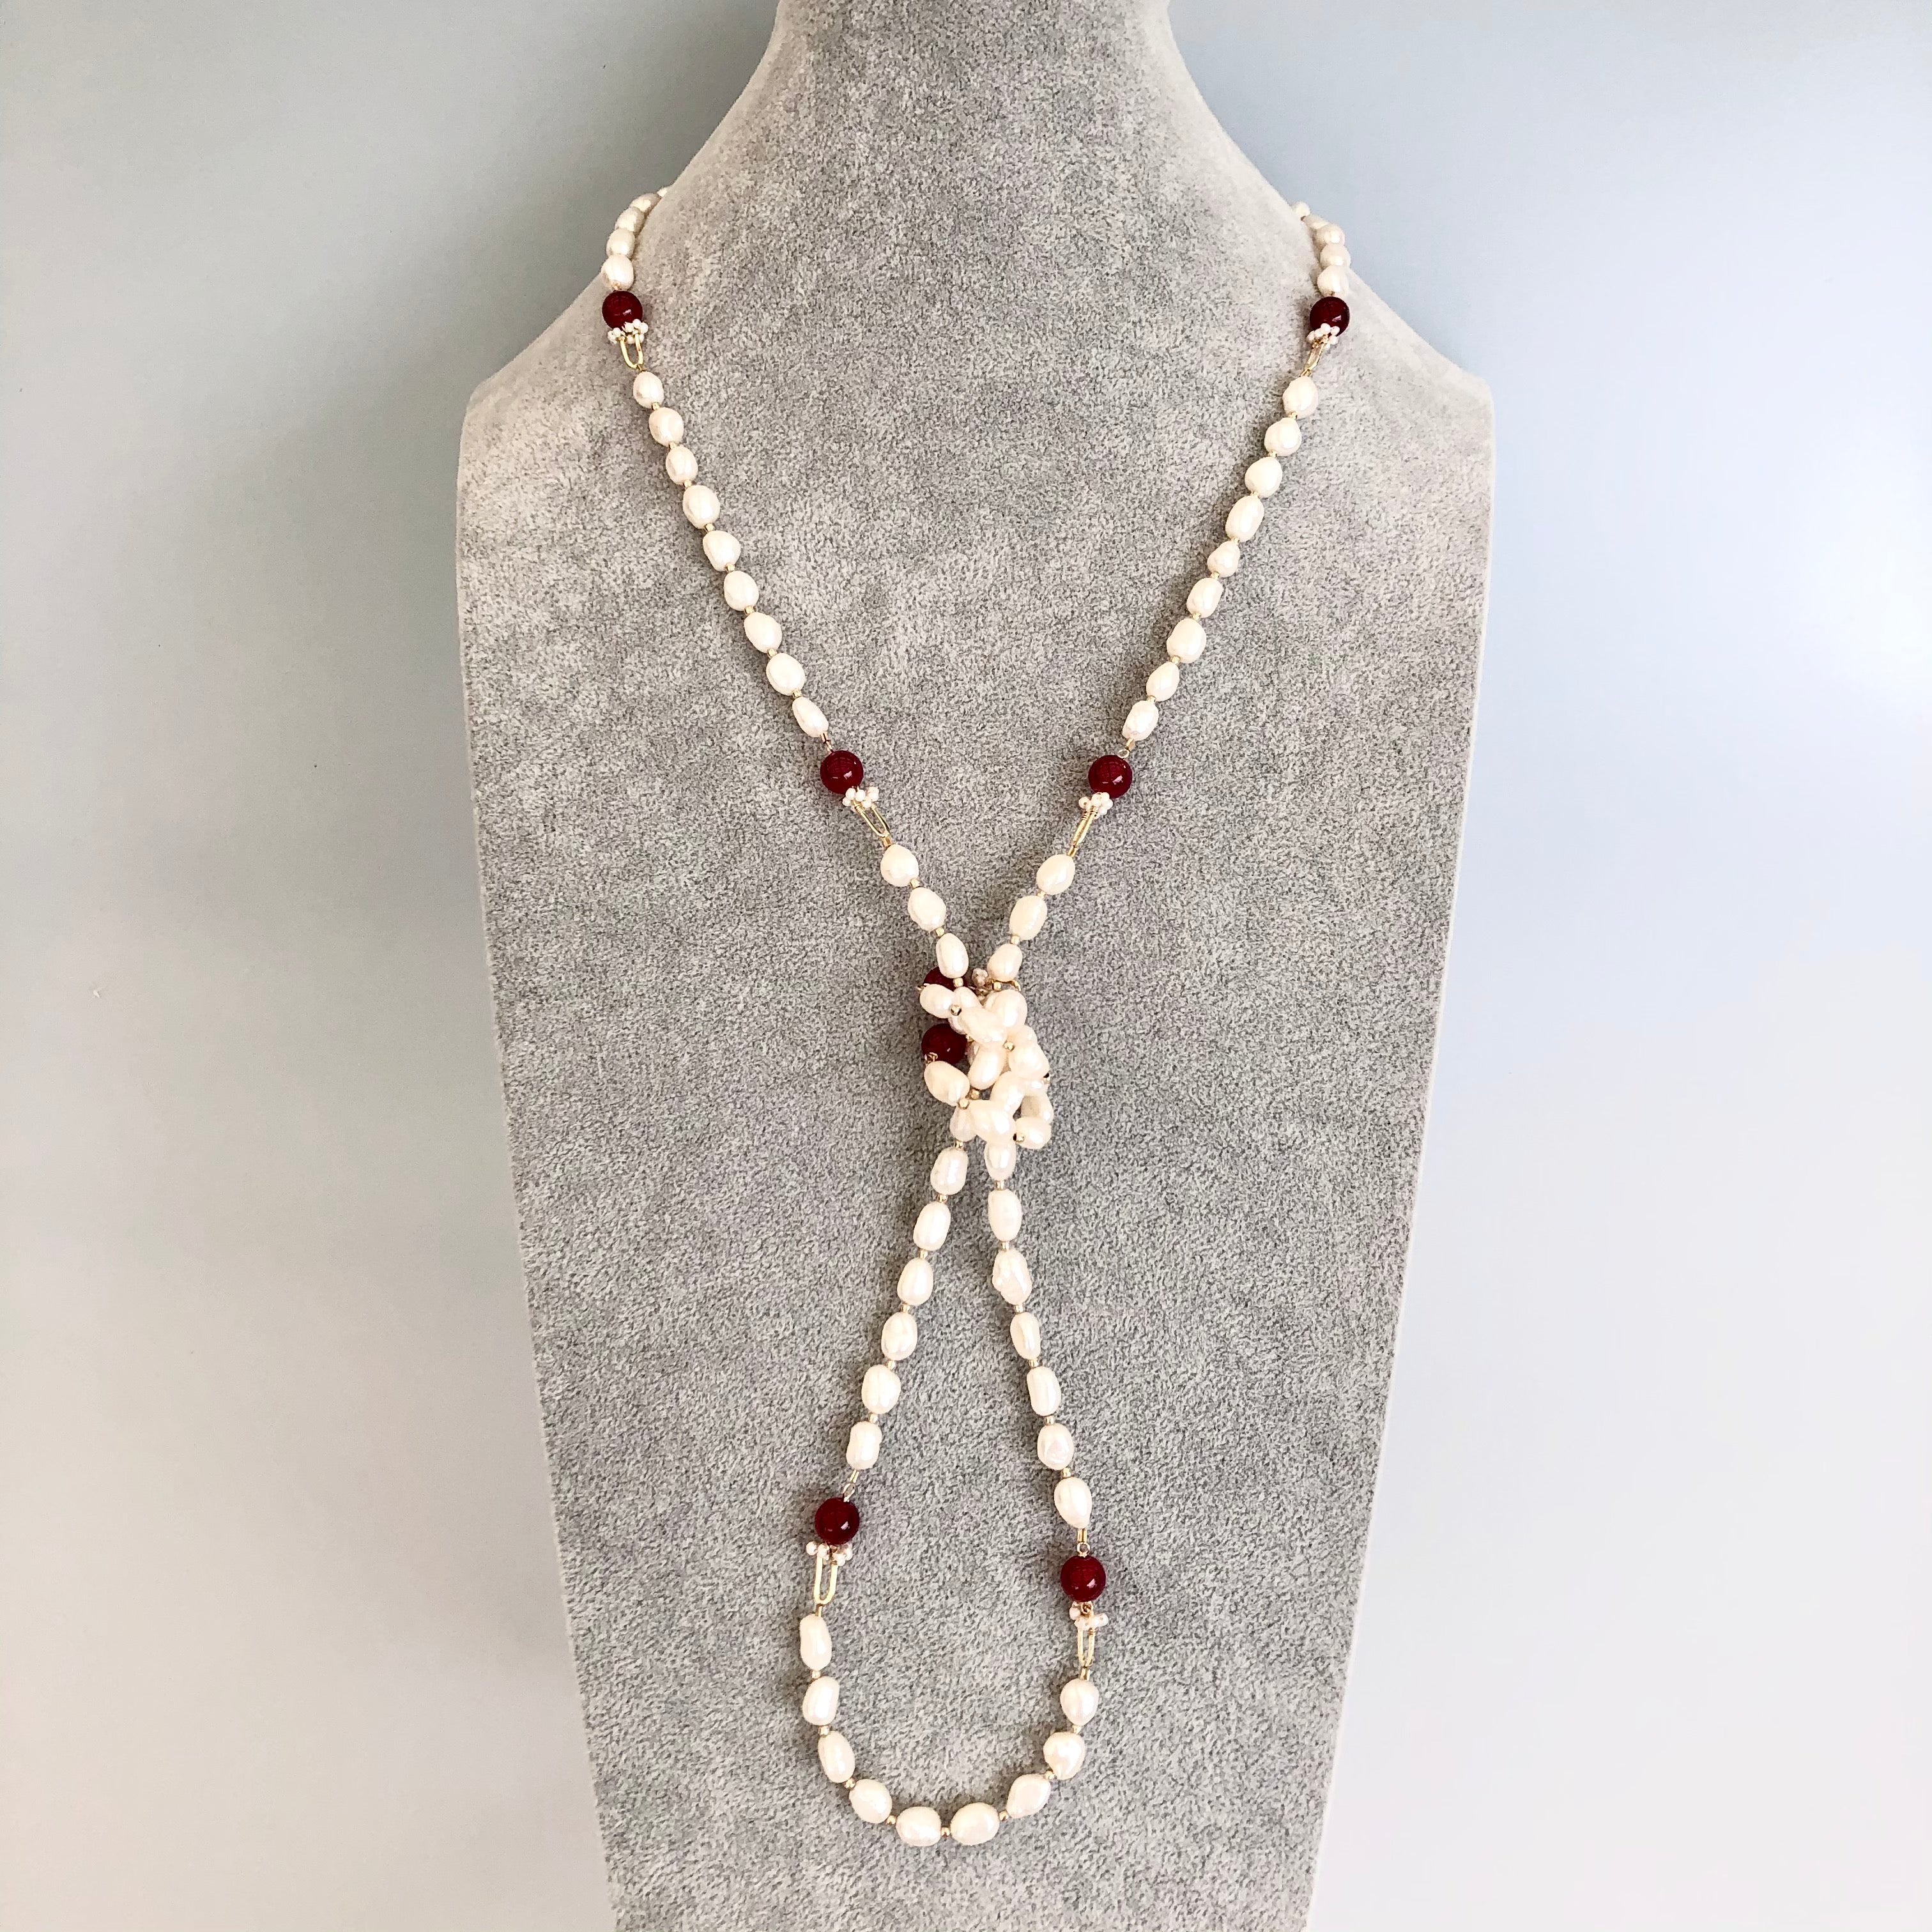 Multi-style Baroque Lariat Asian Yun Necklace | Boutique New Pearl York from Red Boutique Jewelry Set Tassel 